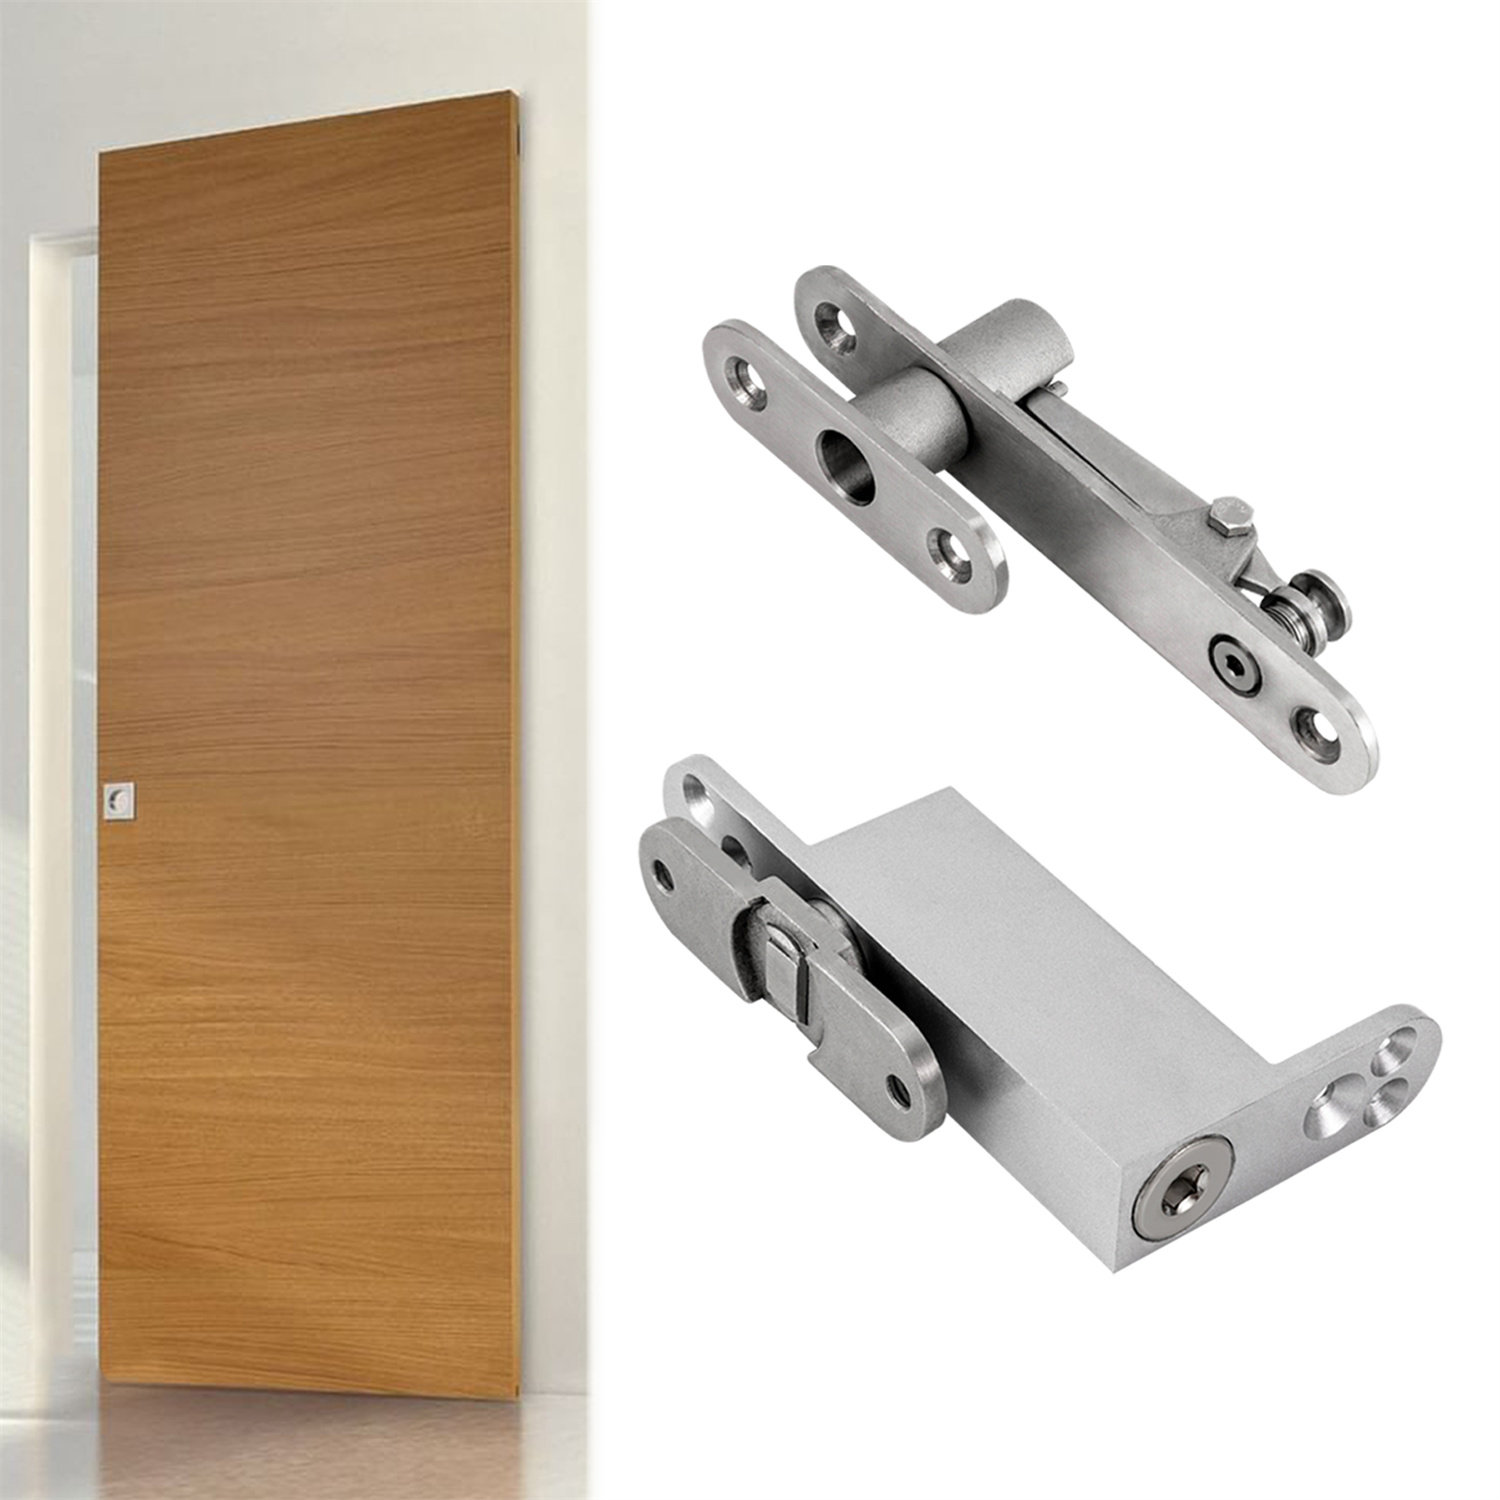 Non-removable Pin Door Hinges: Ideal Security and Durability Alternative